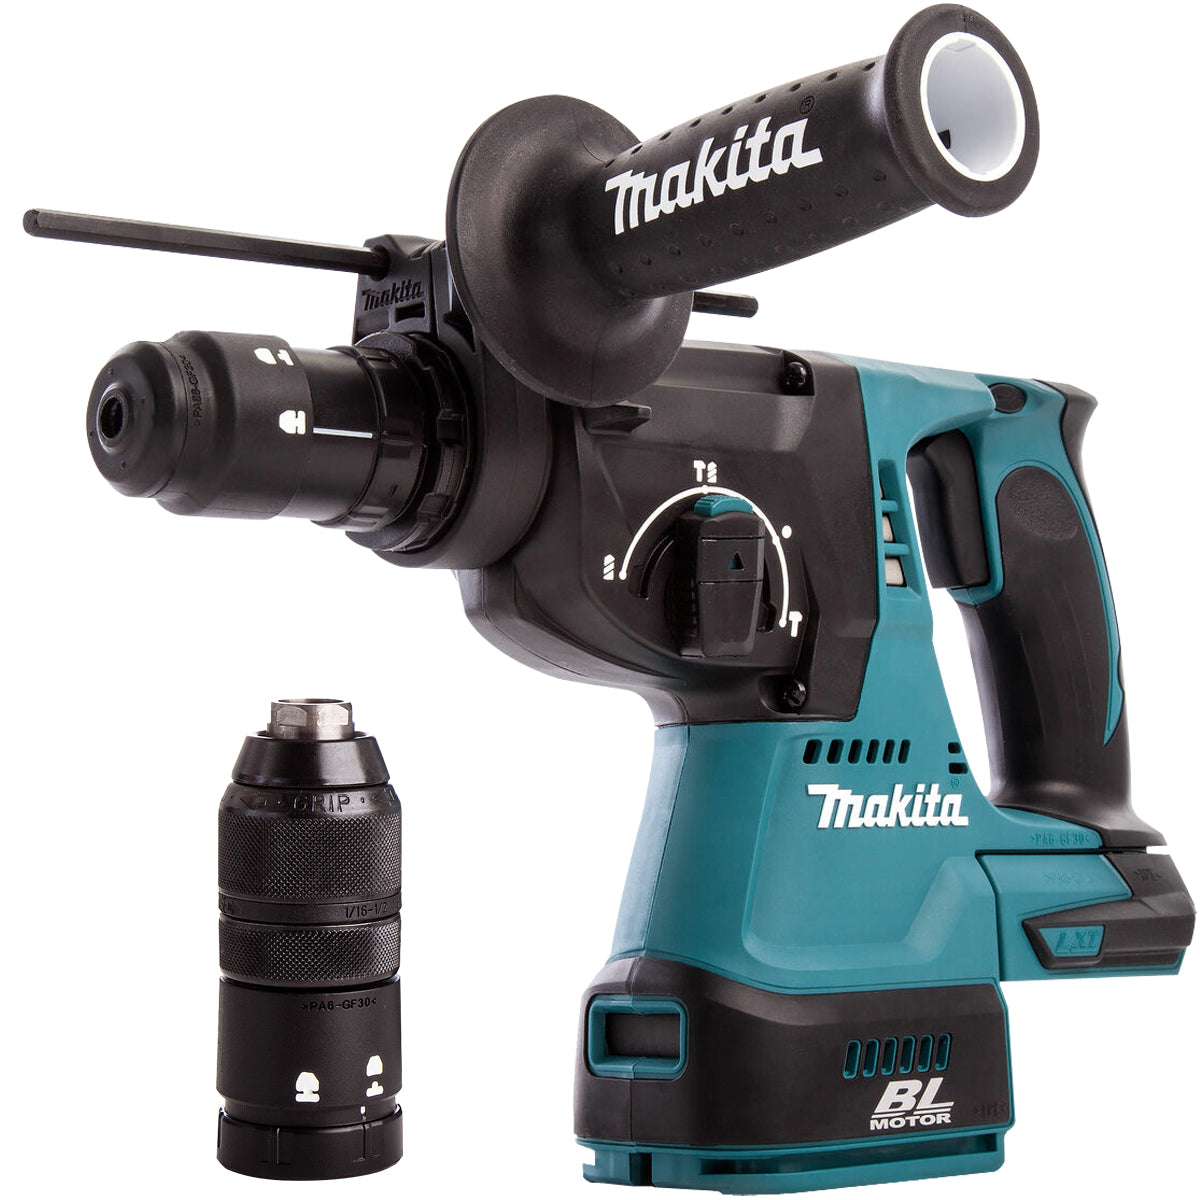 Makita DHR243Z 18V Brushless SDS+ 24mm Rotary Hammer Drill With Case & Dust Extraction System